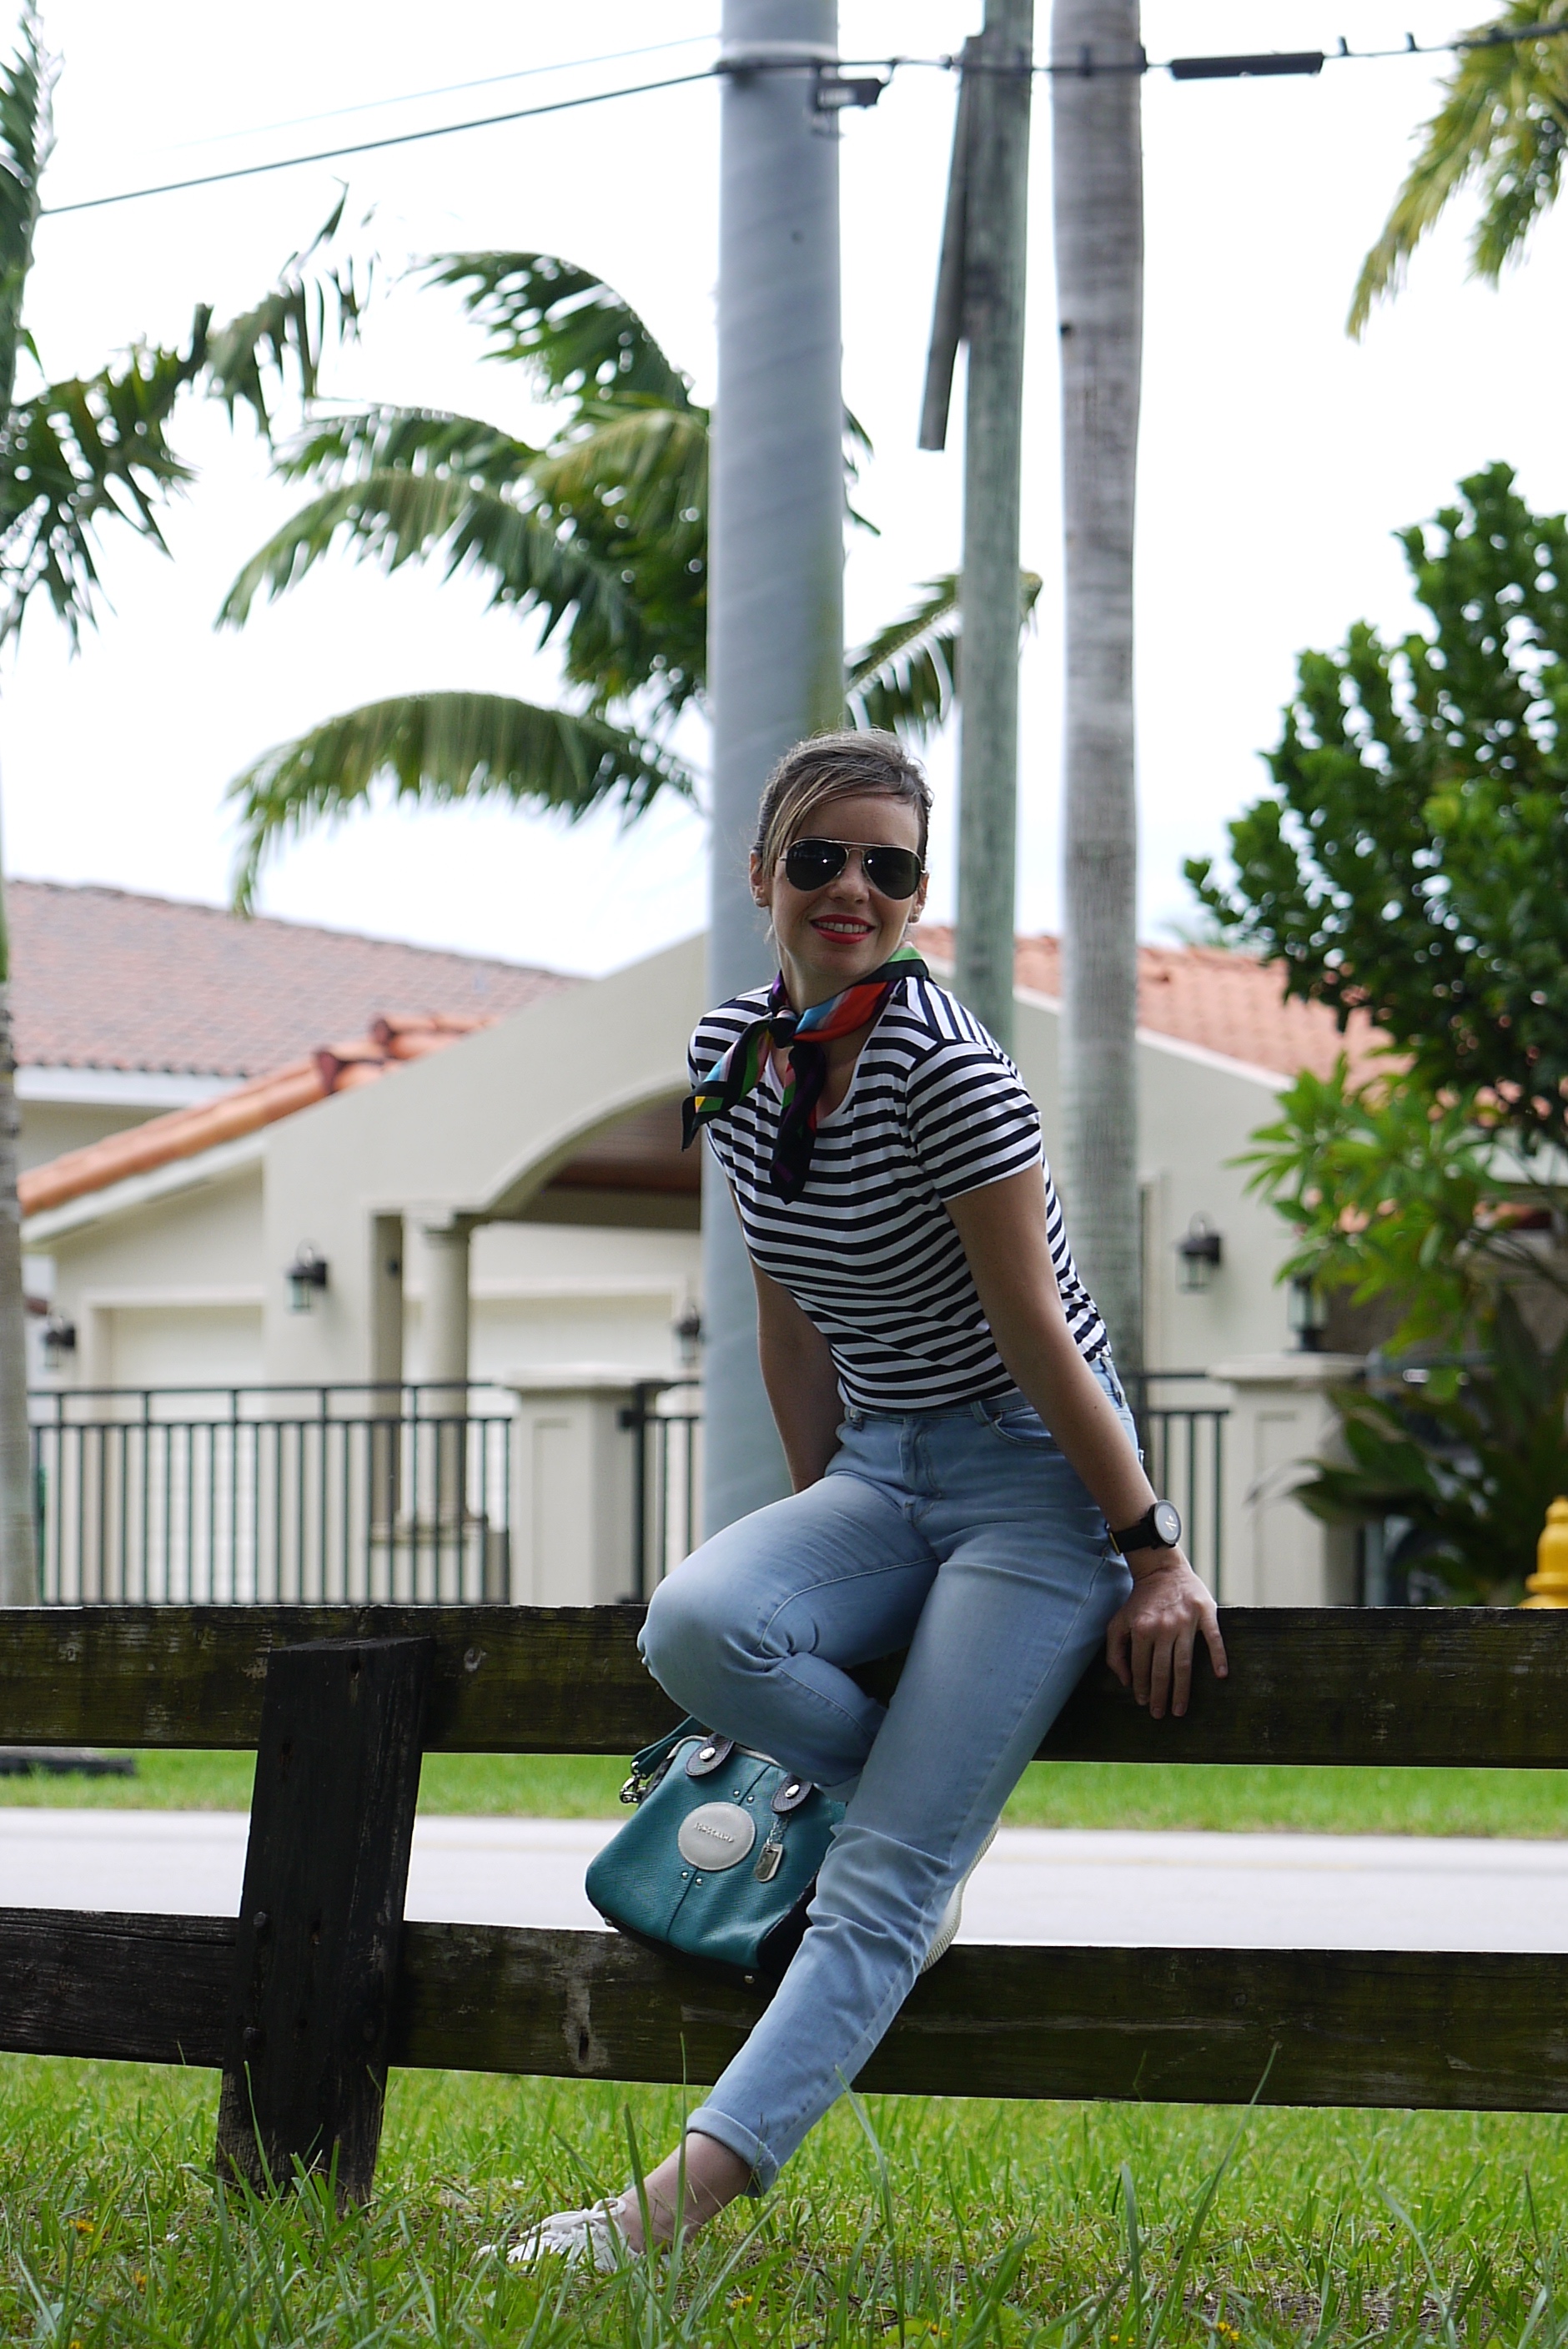 high waist jeans + stripes tee+ scarf and sneakers by Mylovelypeople